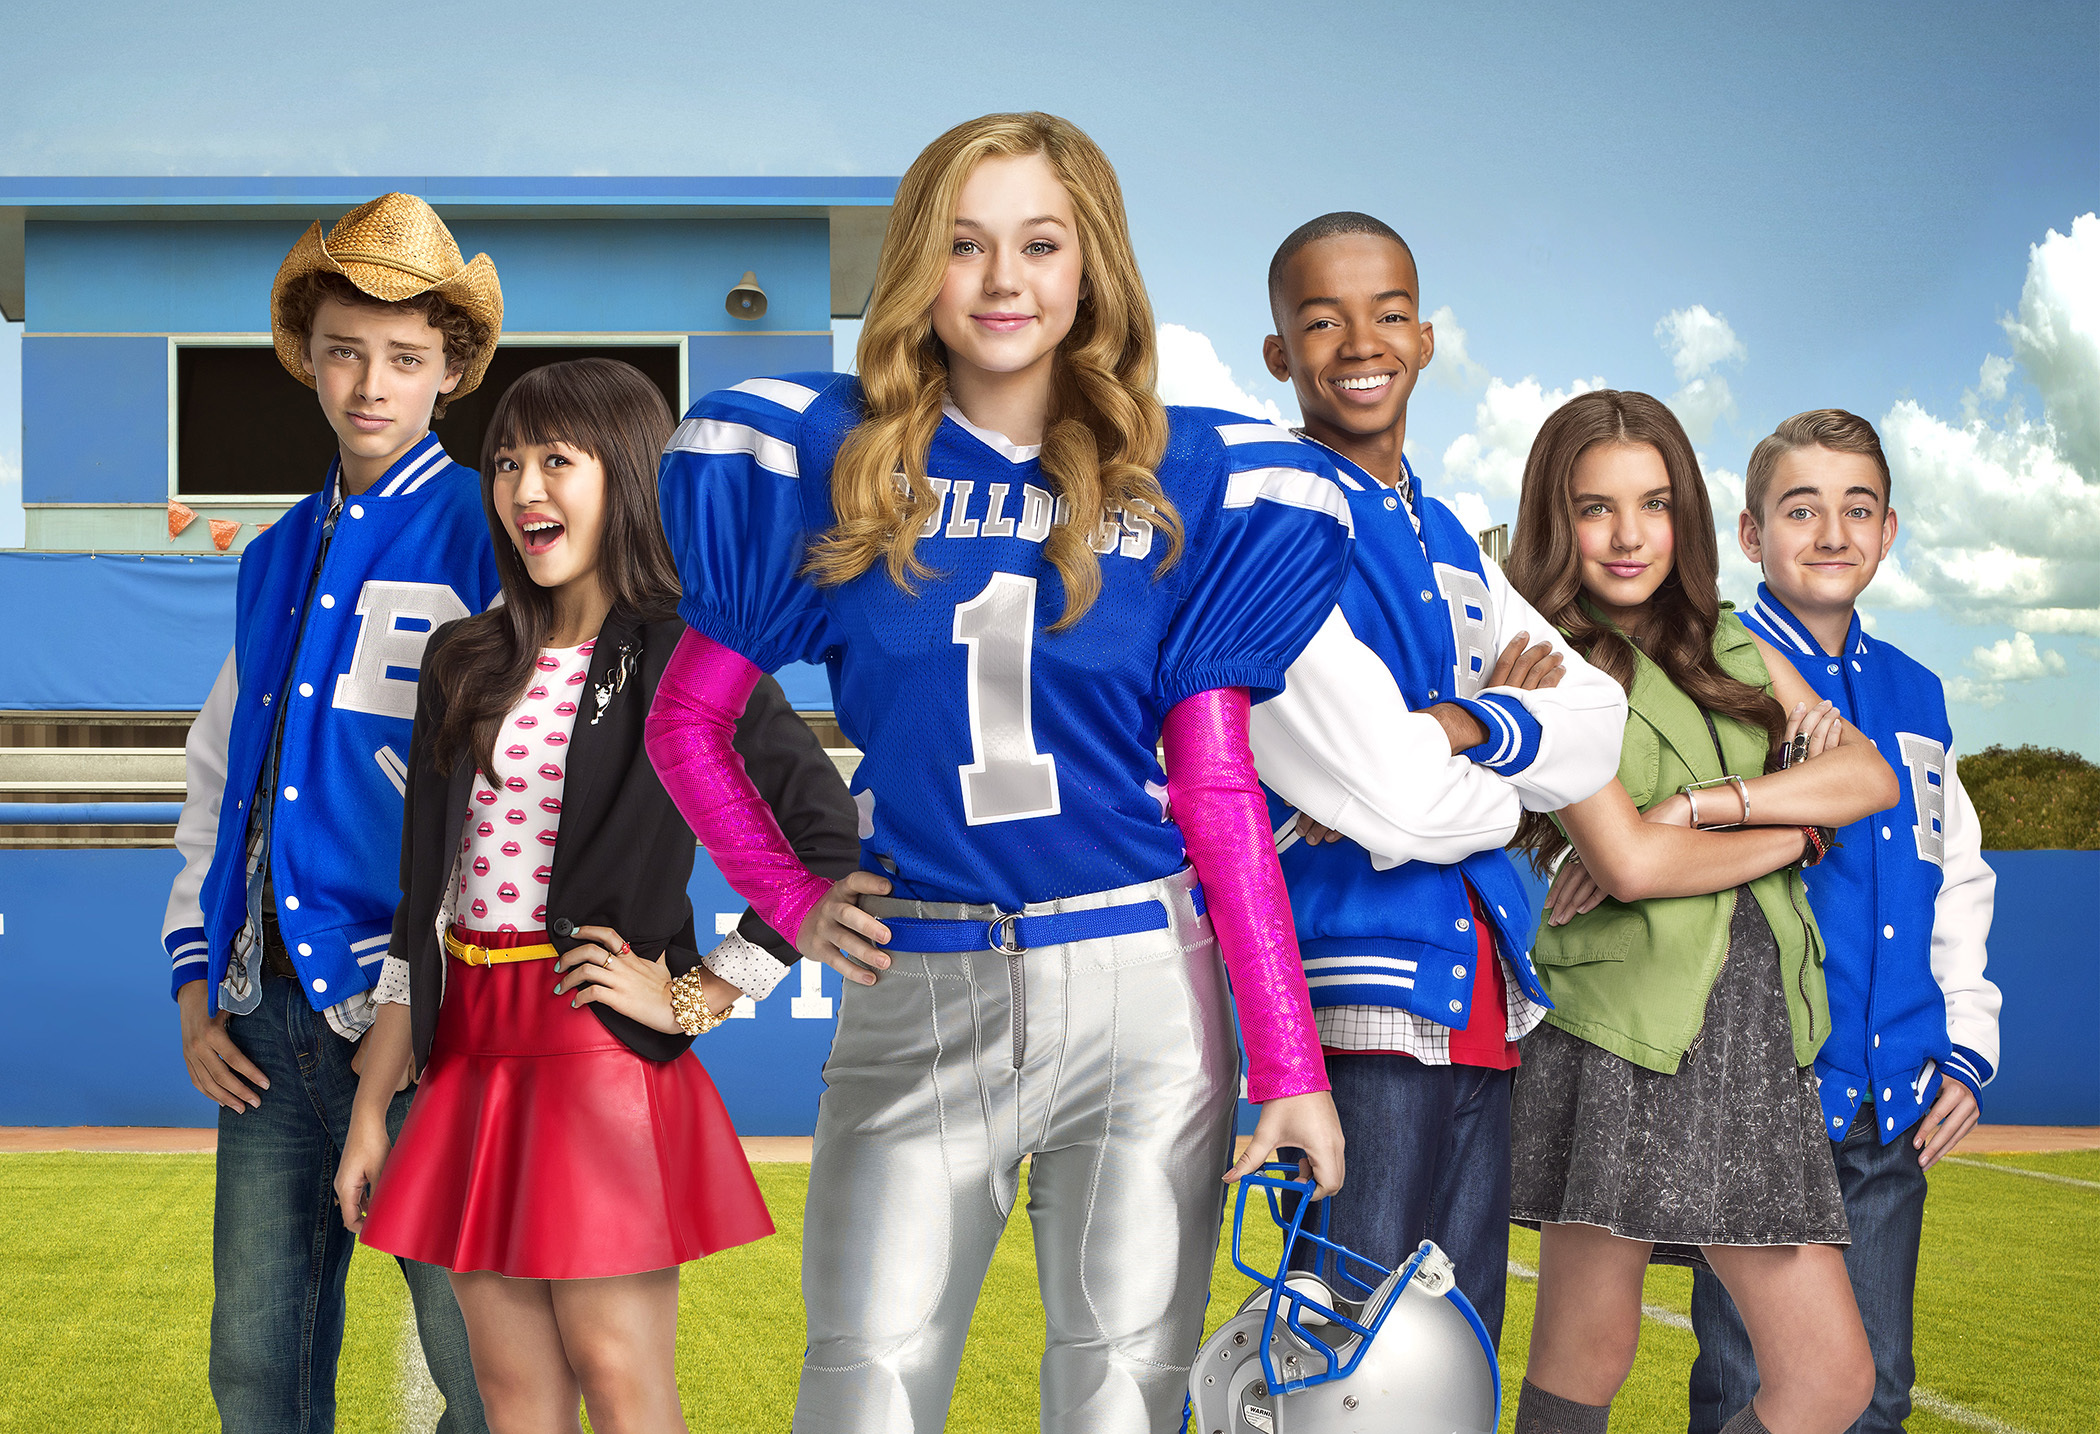 Nickelodeon Premieres a New Live-Action Comedy Series That Follows One  Girl's Dream from the Sideline to the Gridiron in Bella and the Bulldogs,  Saturday, Jan. 17, at 8 P.M. (ET/PT)